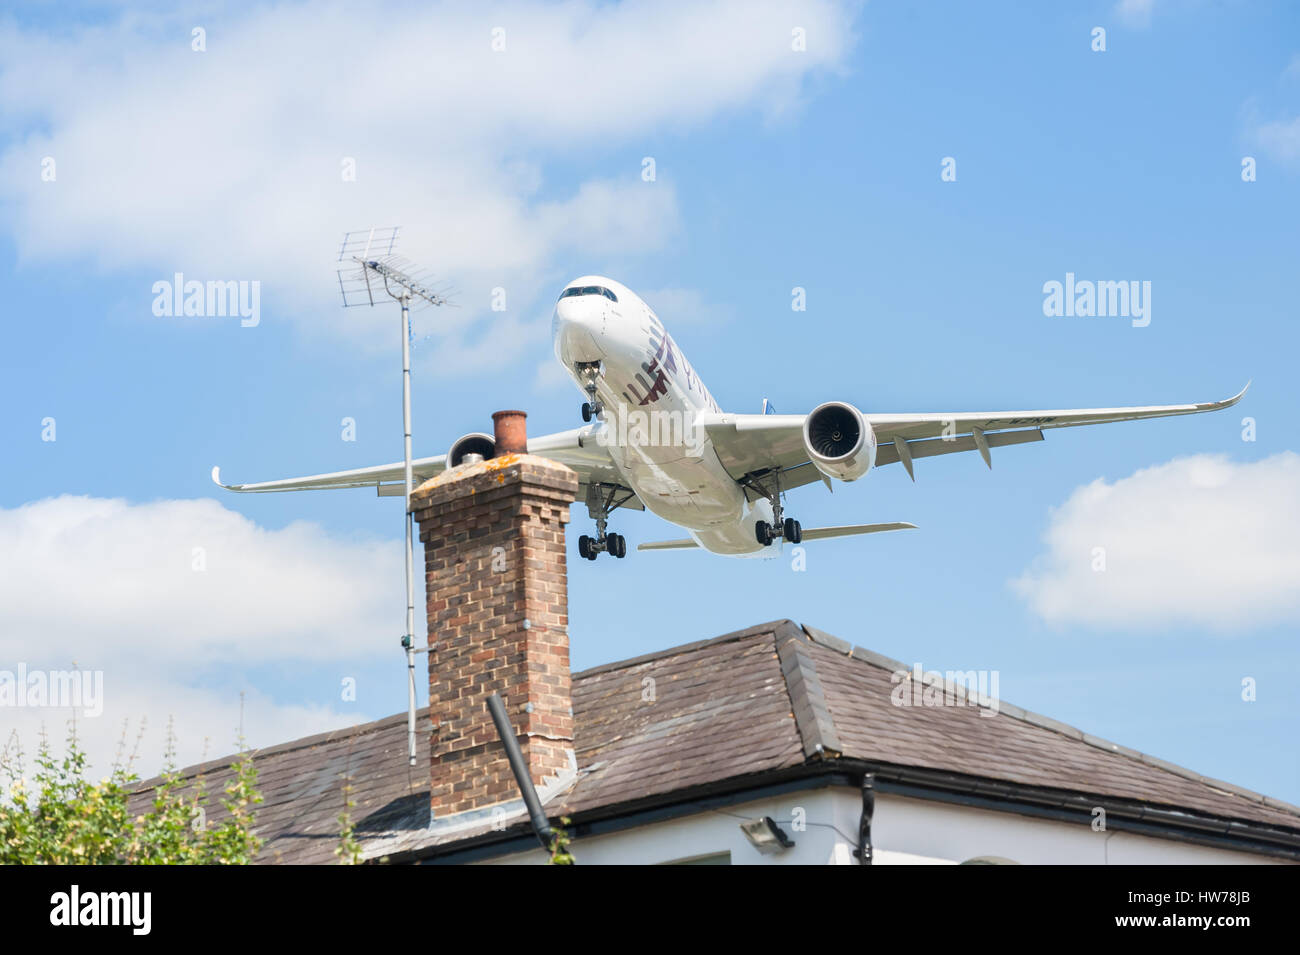 Qatar Airways Airbus A350 on landing approach over rooftops to participate at the Farnborough Airshow,  UK Stock Photo